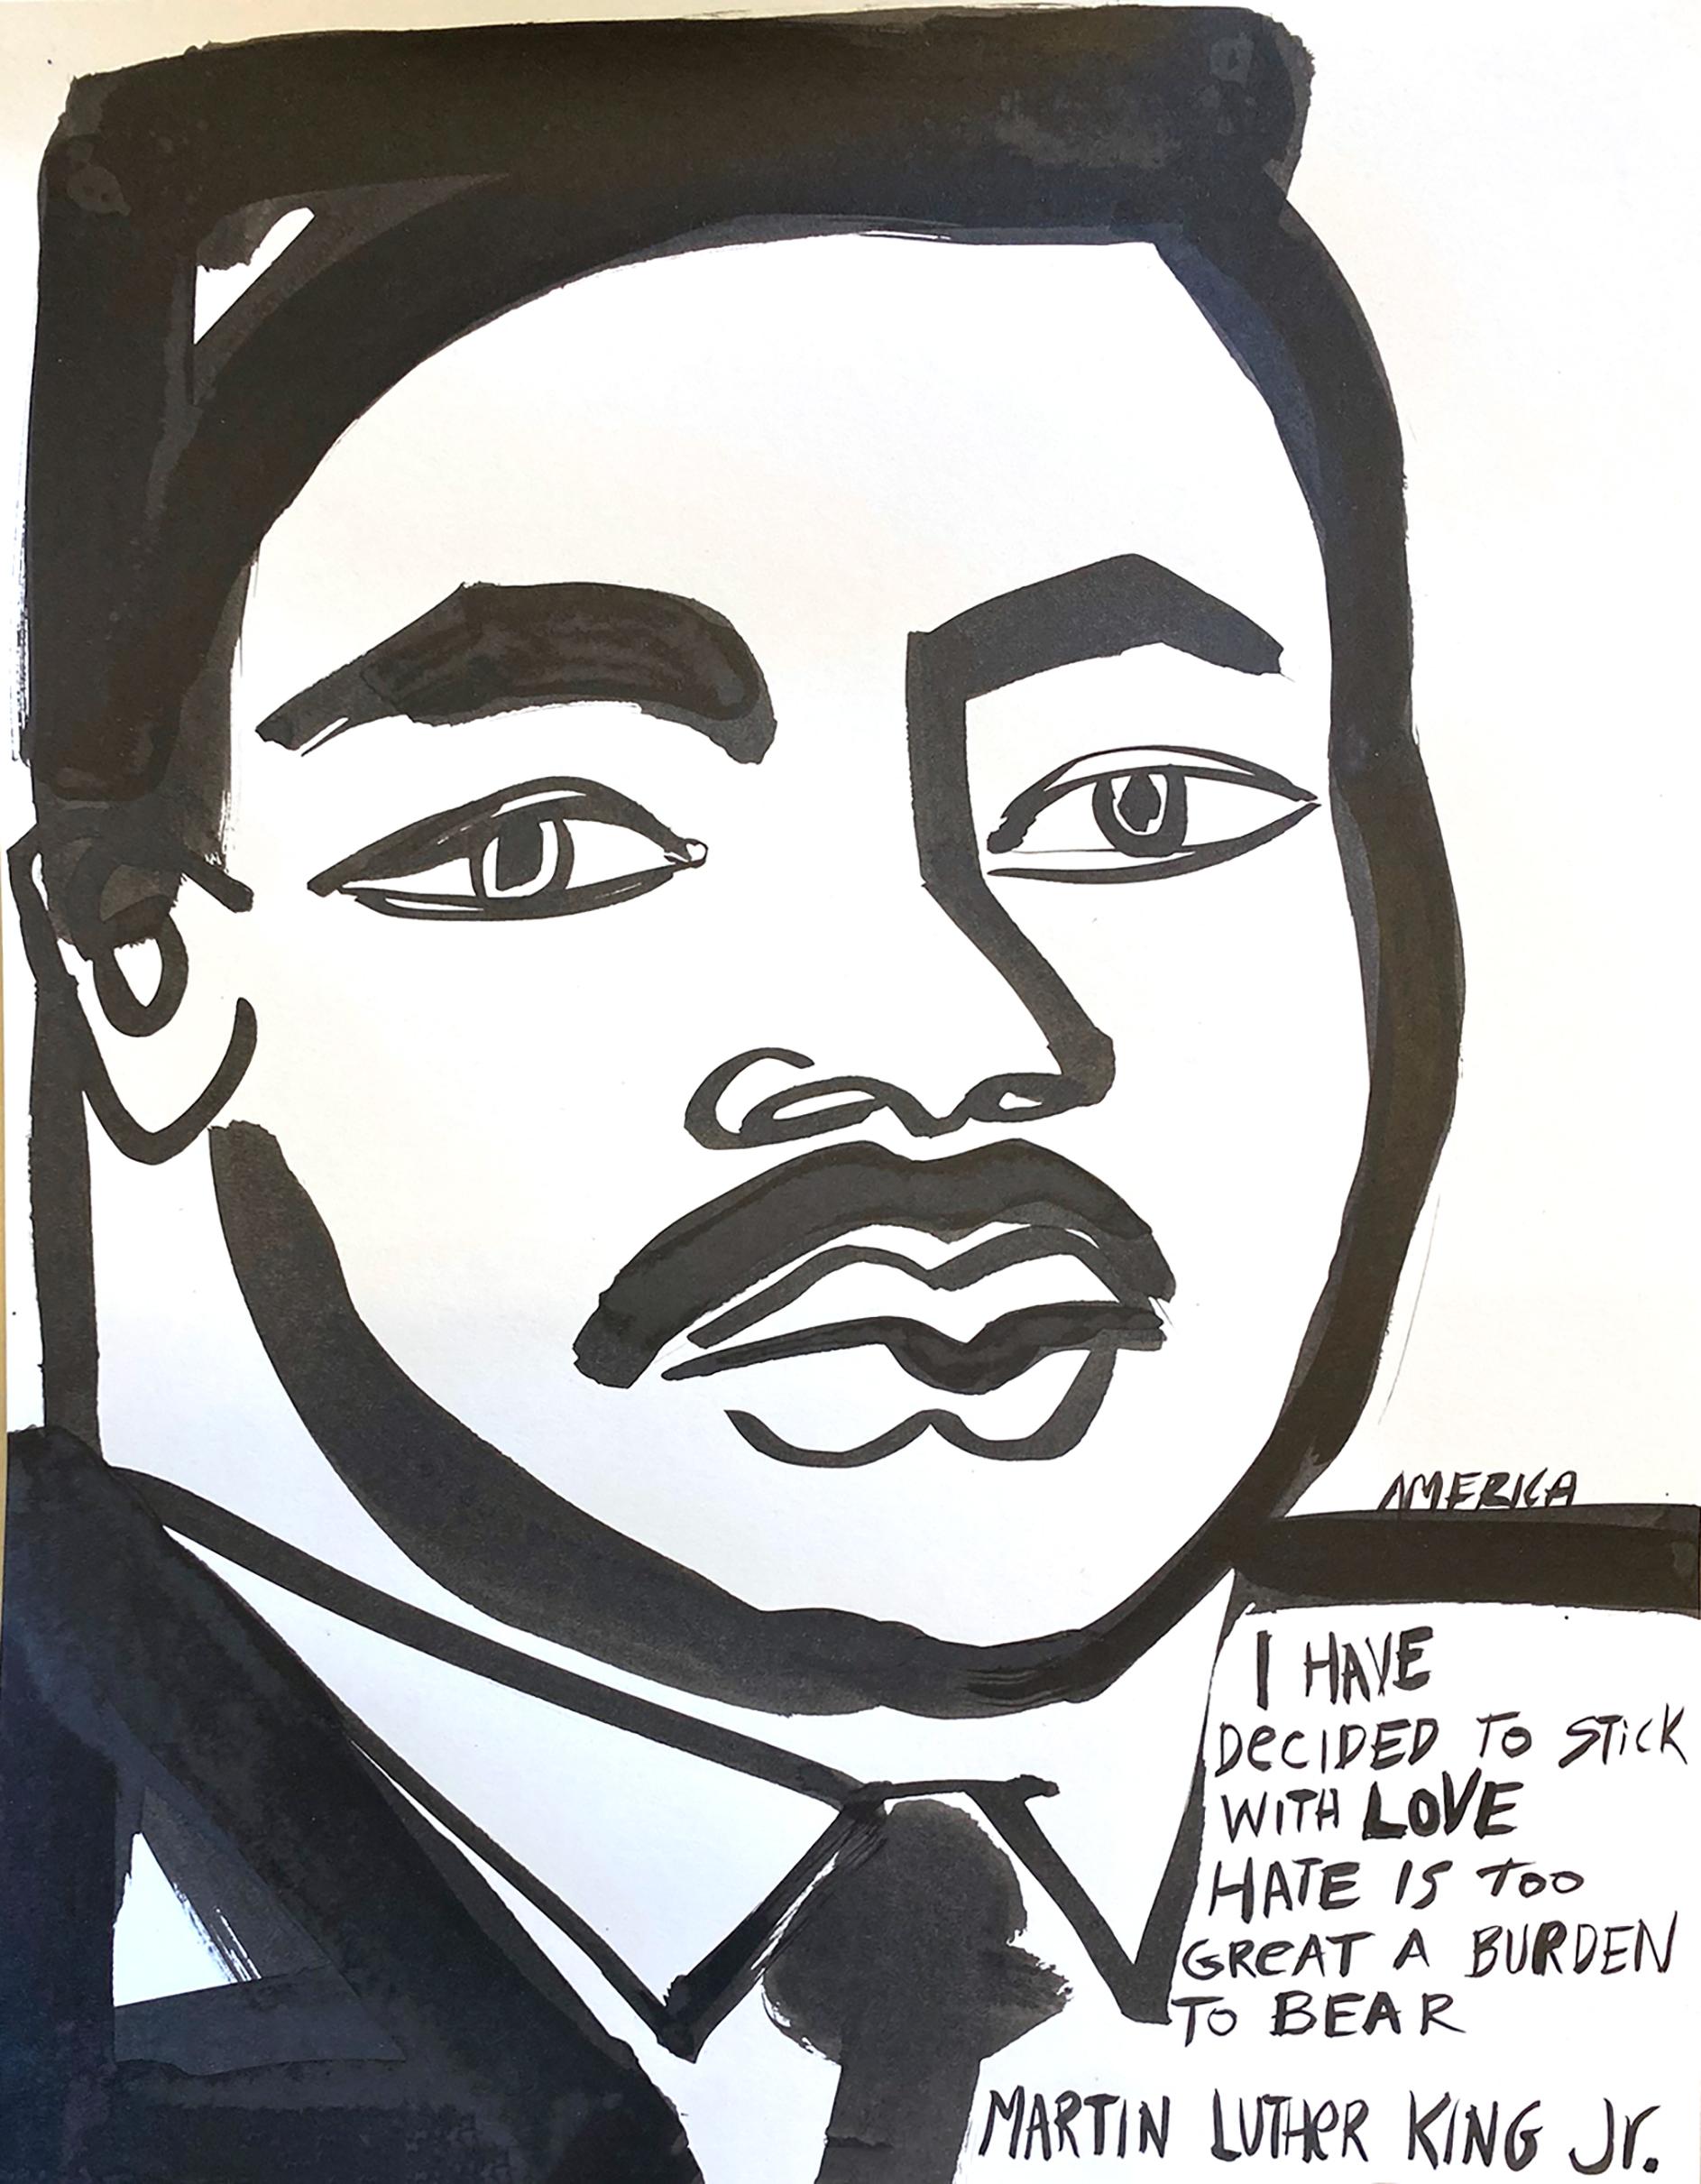 Martin Luther King Jr No. 2, America Martin- portion of sale to ACLU/NAACP